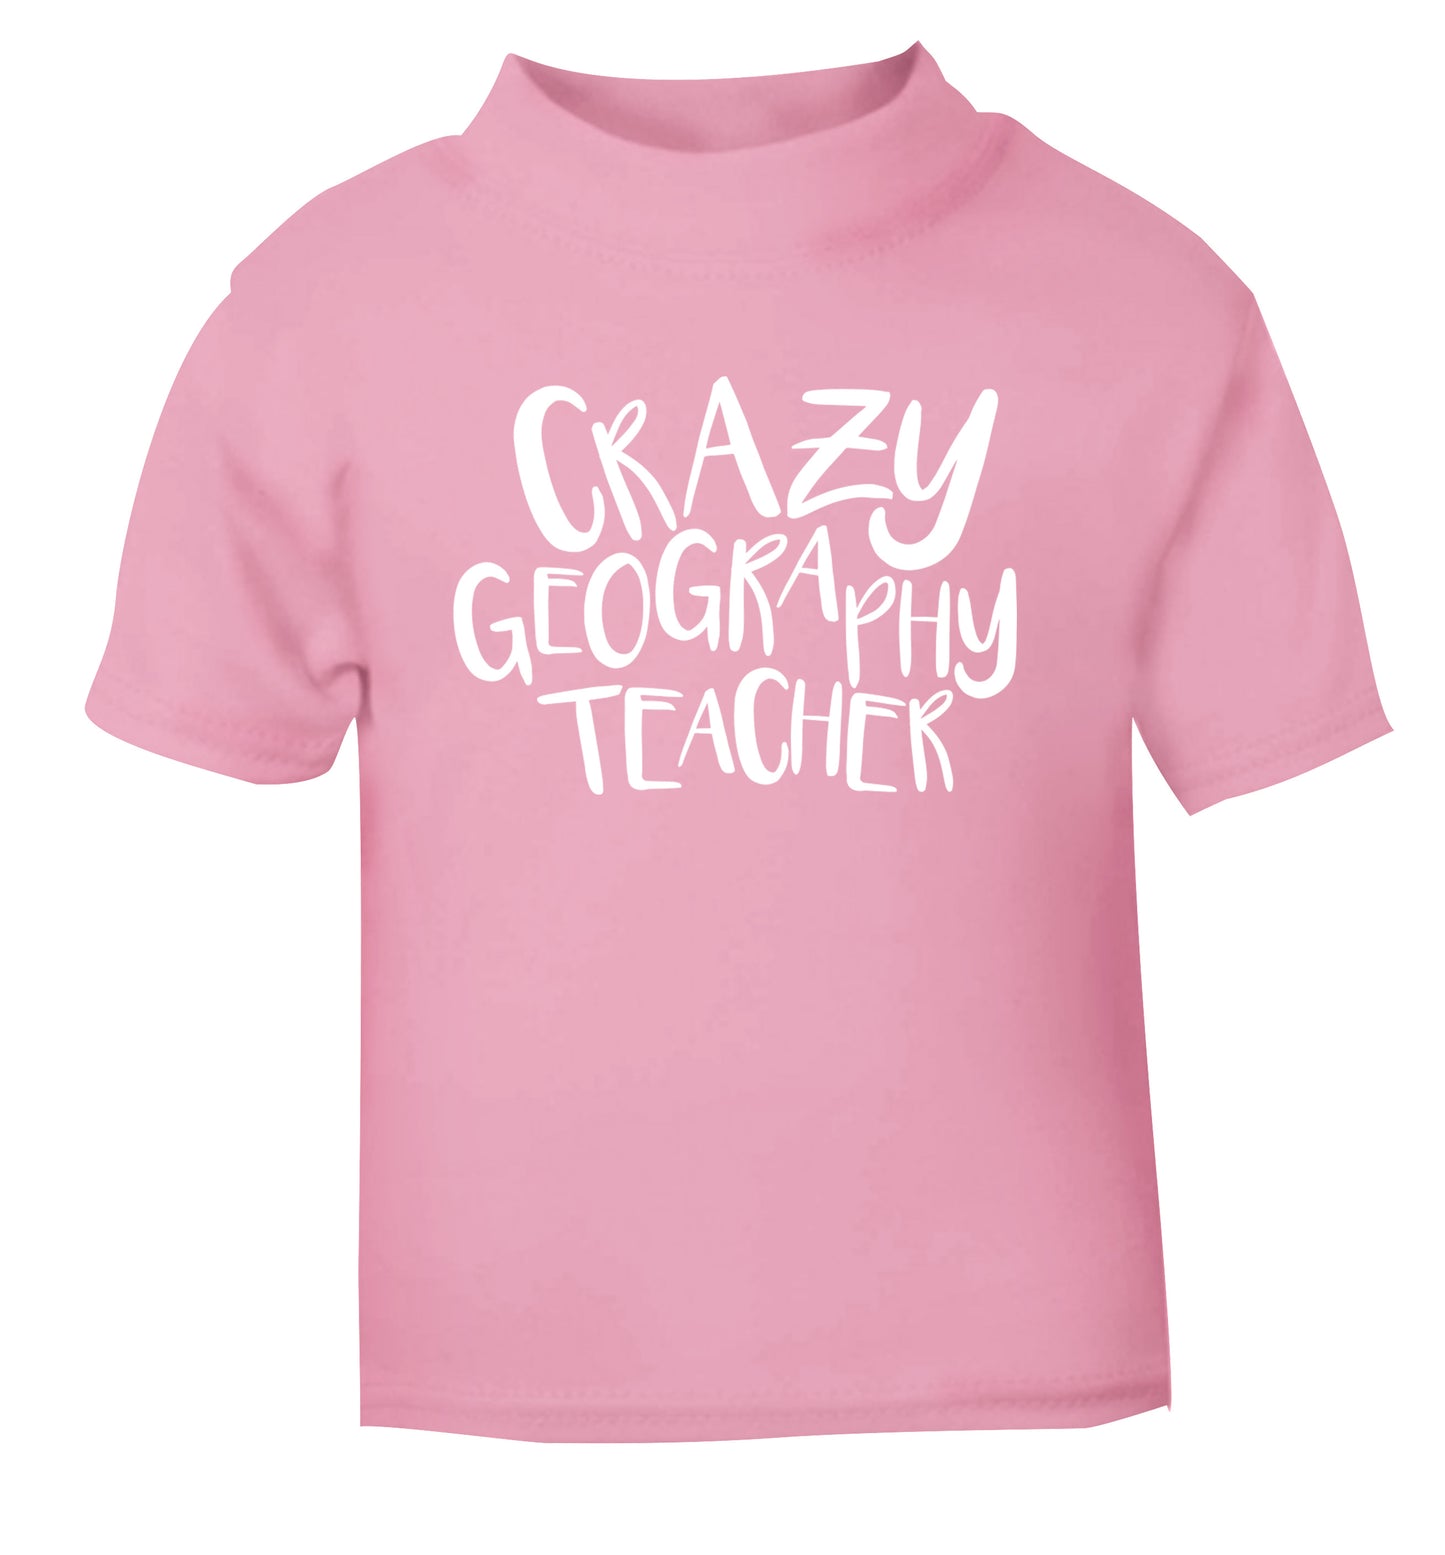 Crazy geography teacher light pink Baby Toddler Tshirt 2 Years